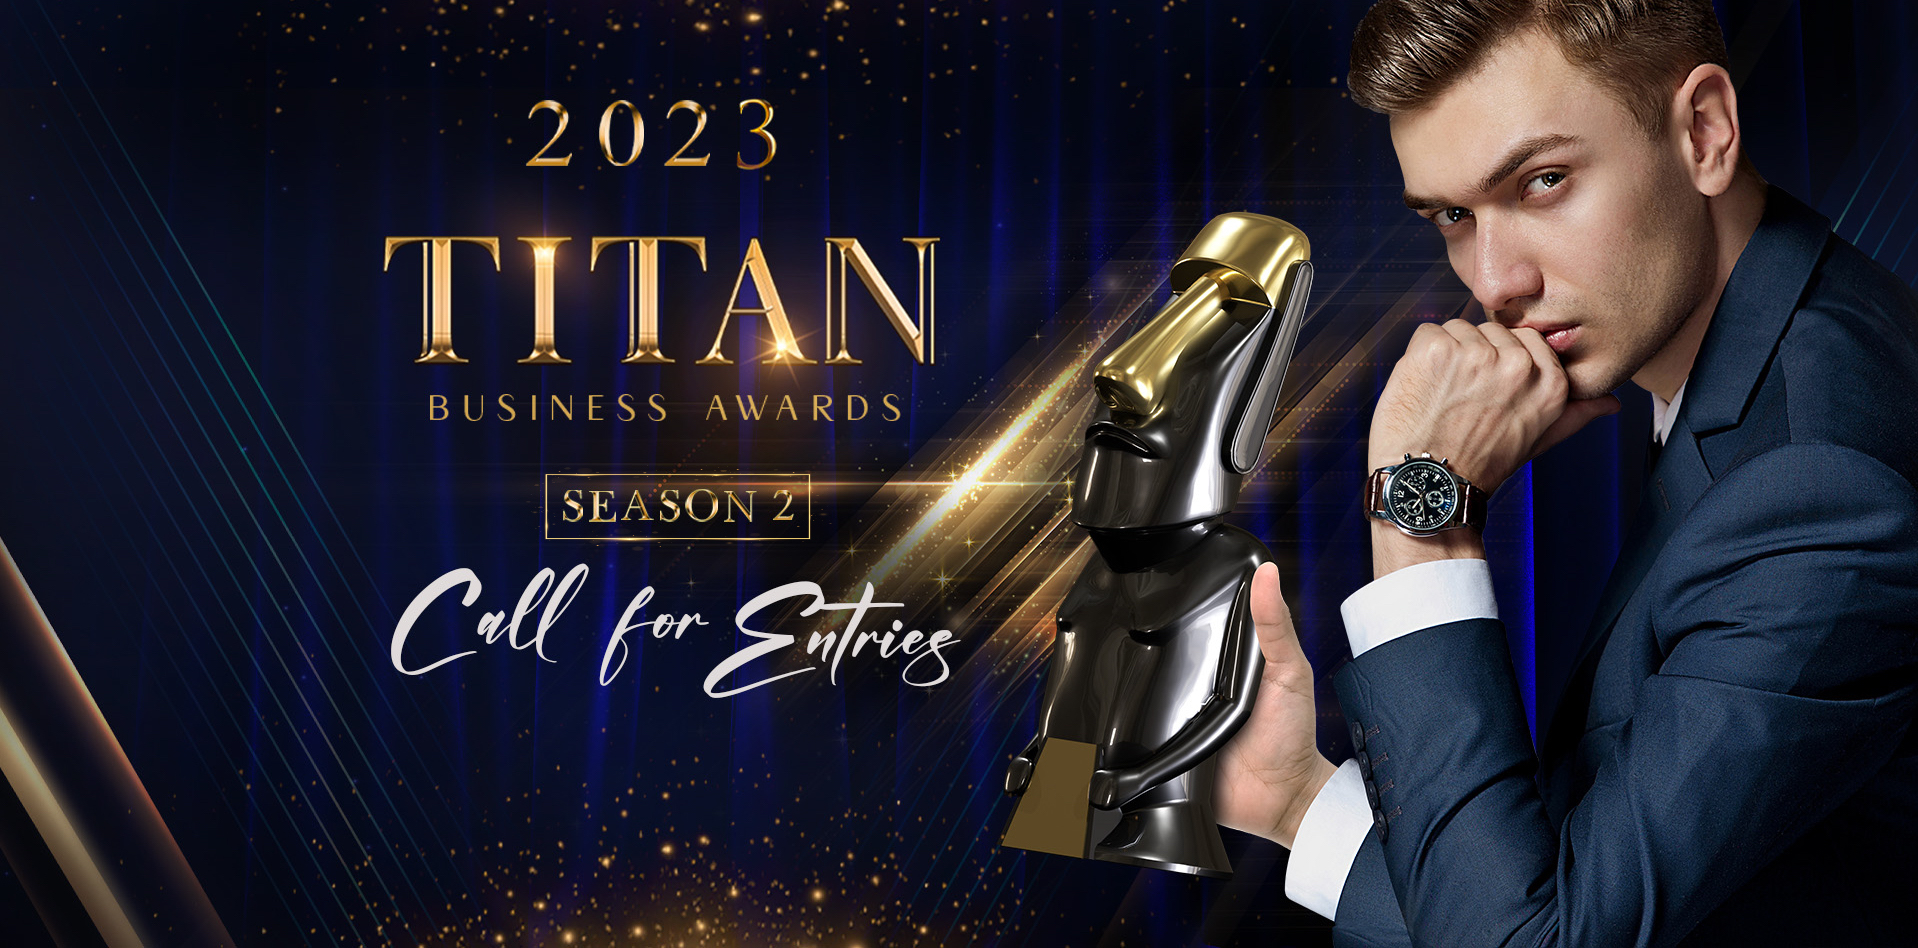 2023 TITAN Business Awards: Season 1 Comes to an End - Official Results Out Now